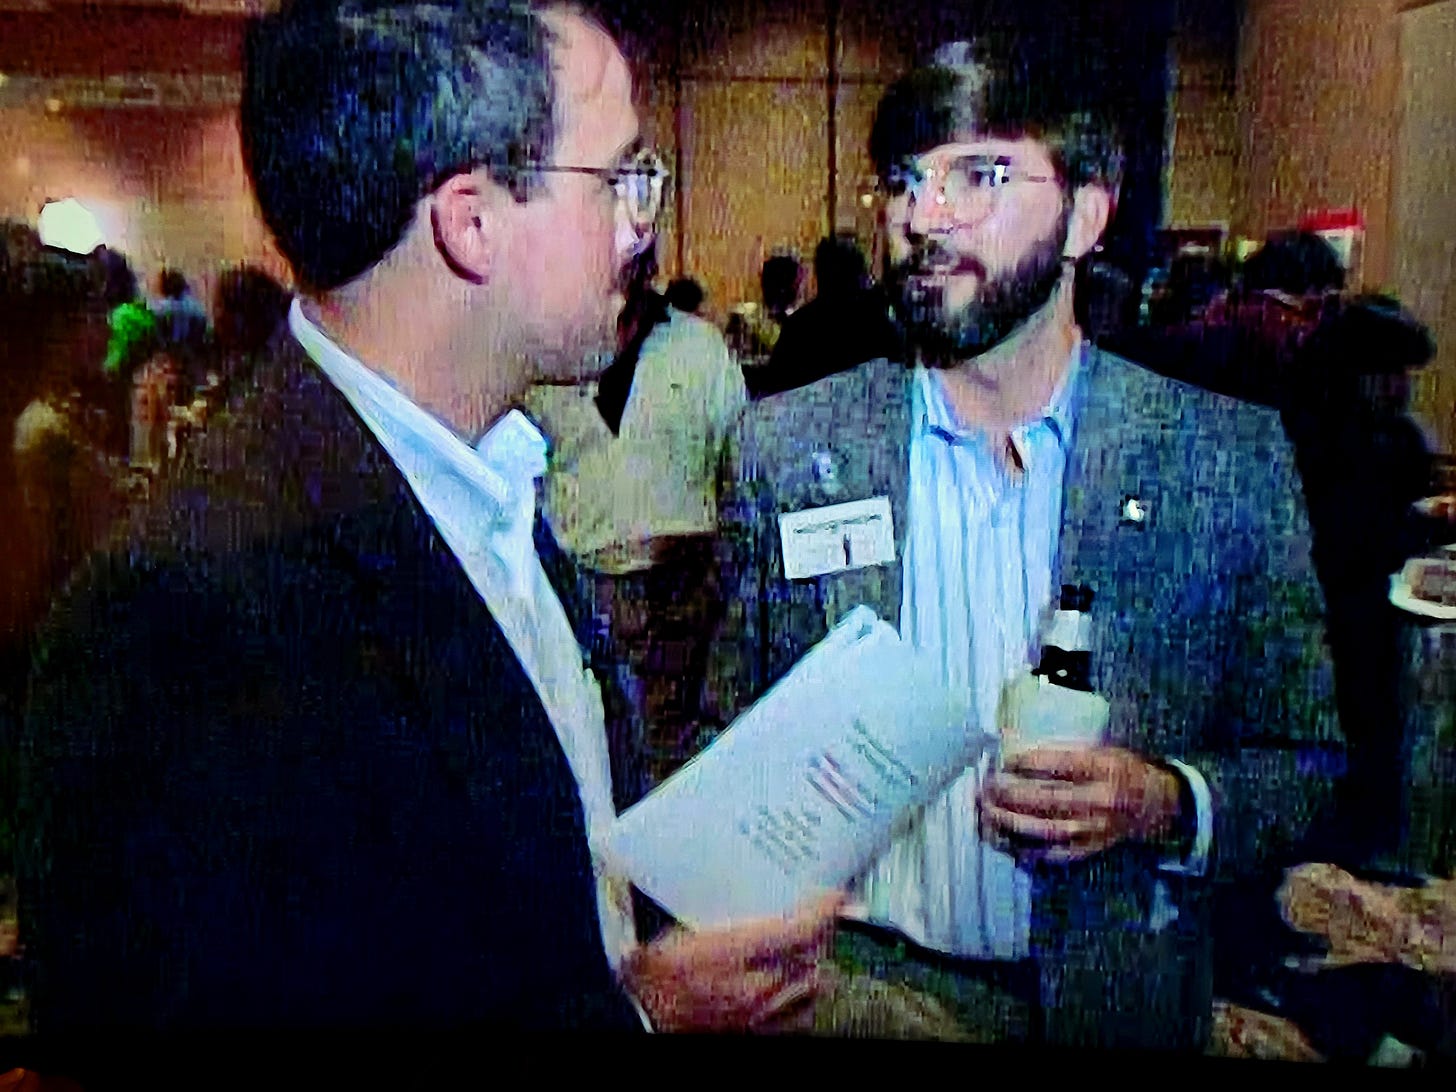 My "devil's advocate," Juan Garcia (left) and myself in a scene from the documentary, "Beyond JFK," directed by Barbara Kopple & Danny Schechter, shot at the opening reception of The Assassination Symposium on John F. Kennedy, Hyatt Reunion Hotel, Dallas, 1991.